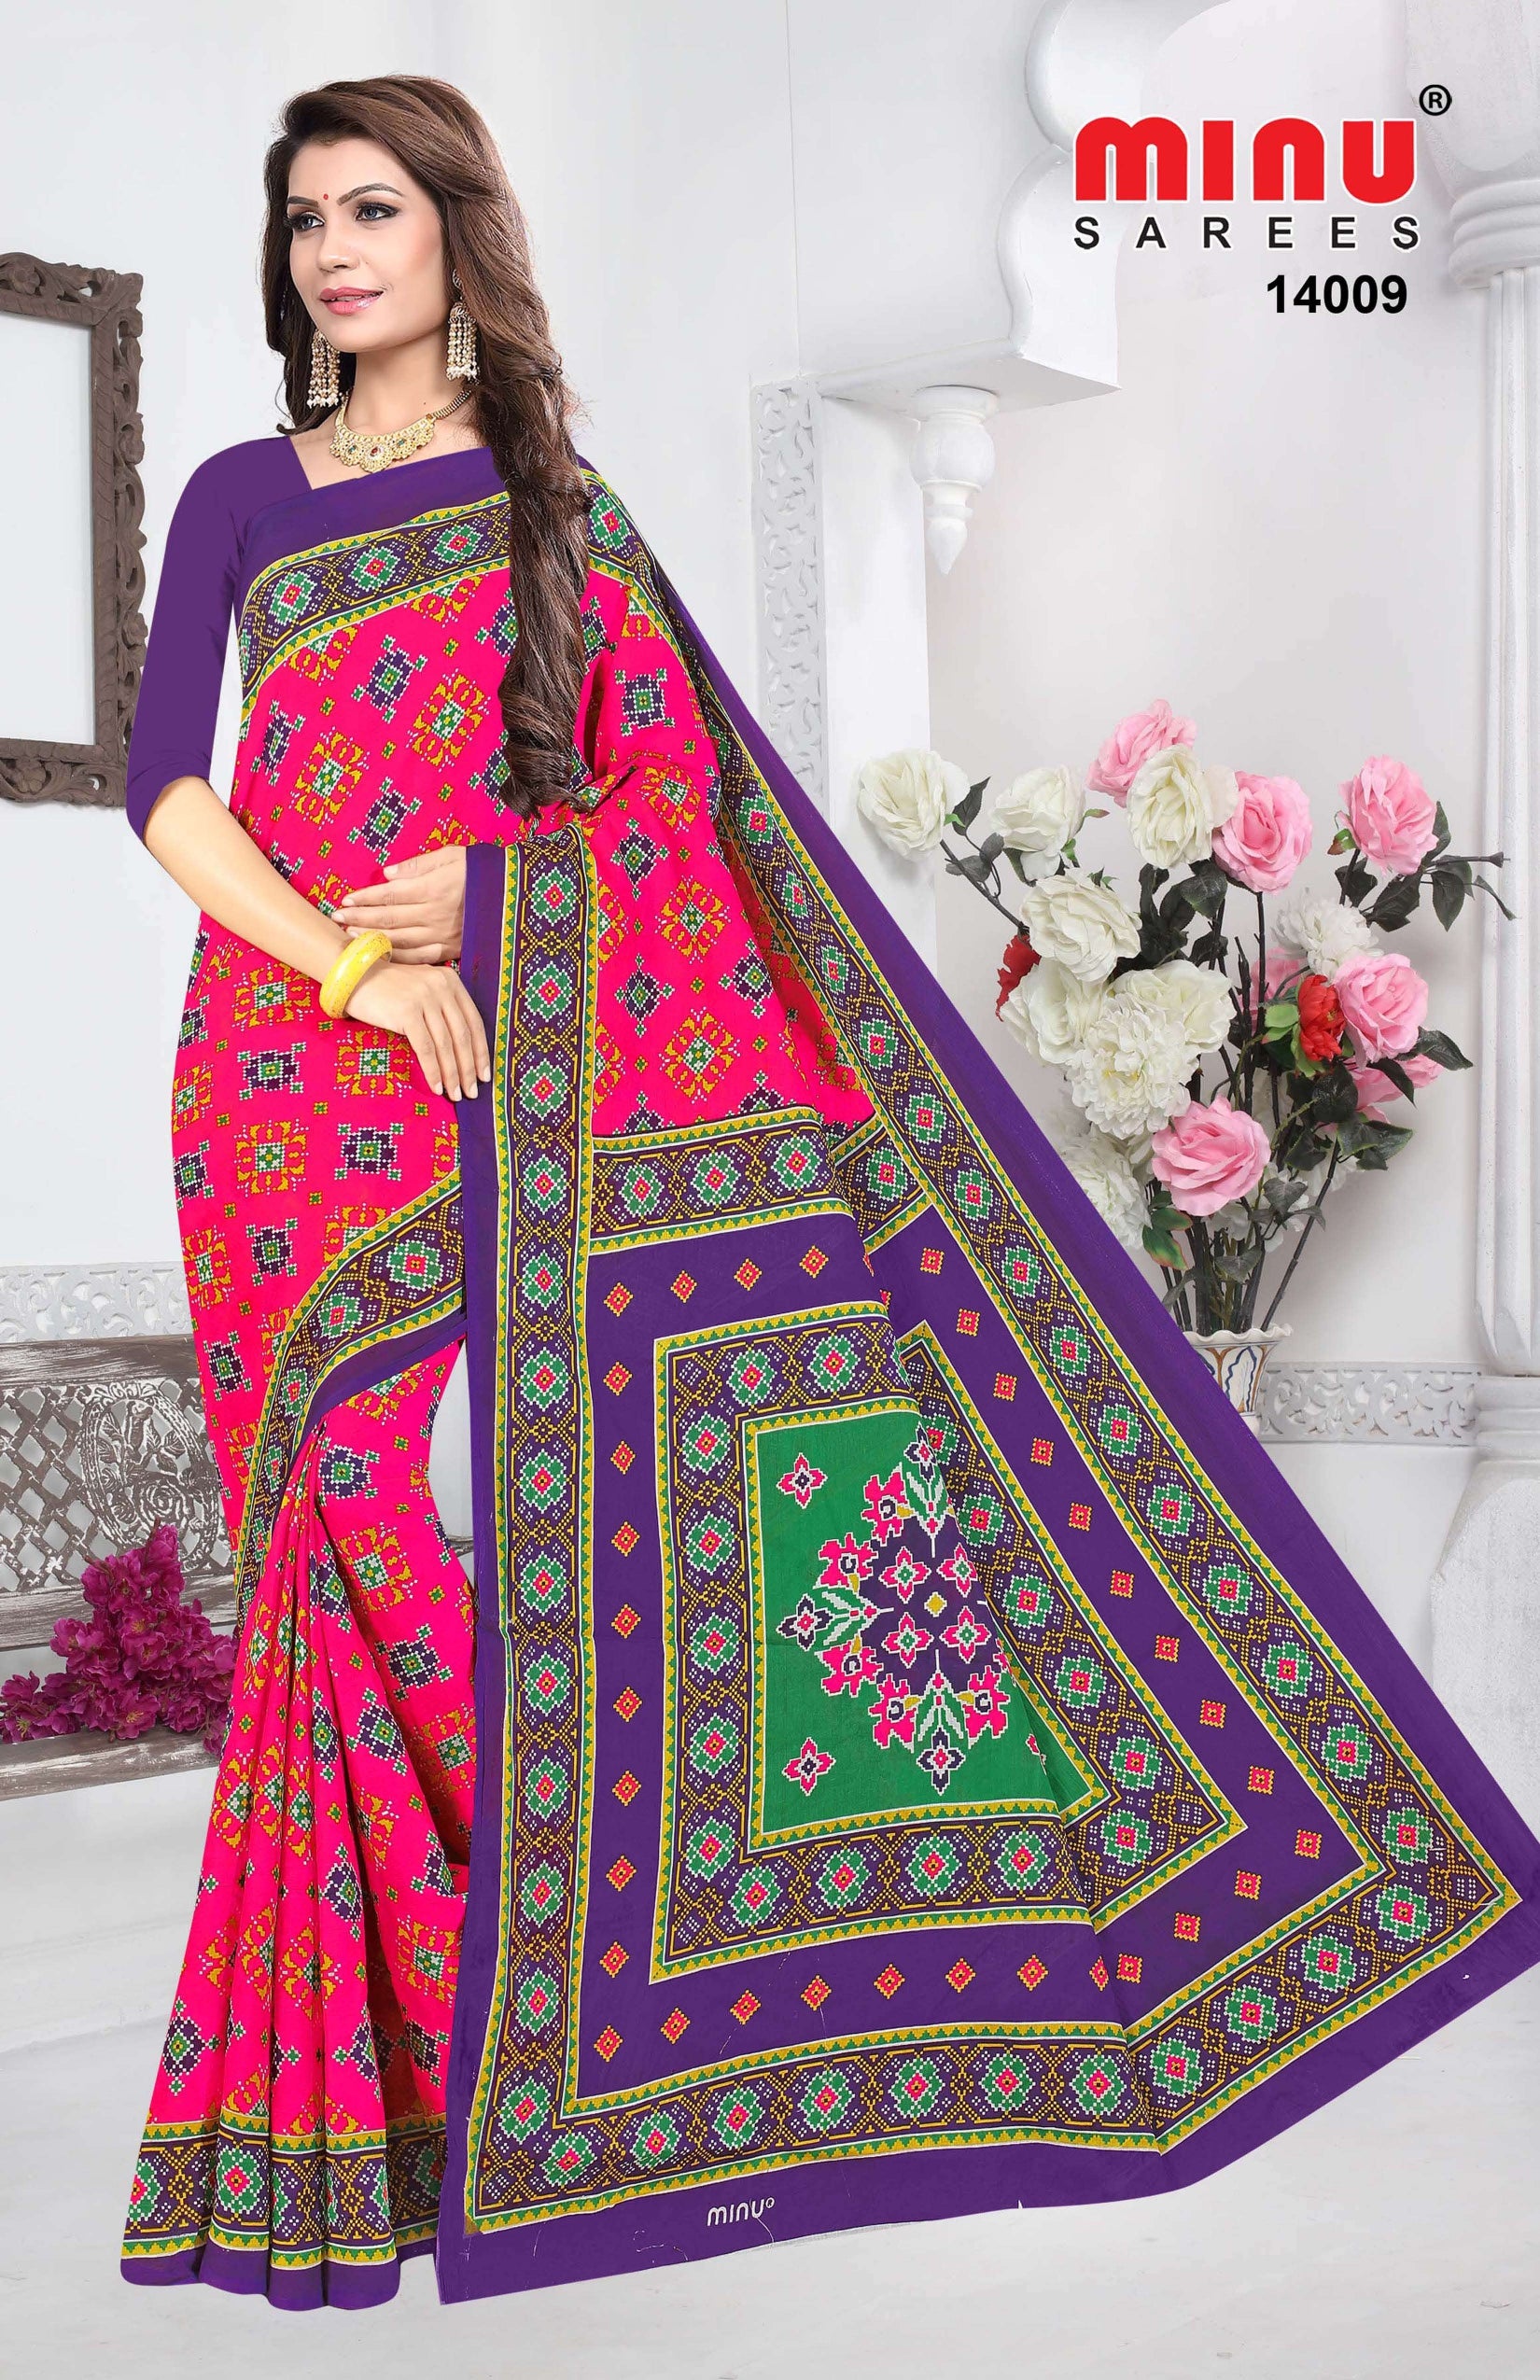 Woman wearing multi colored printed saree for retail online